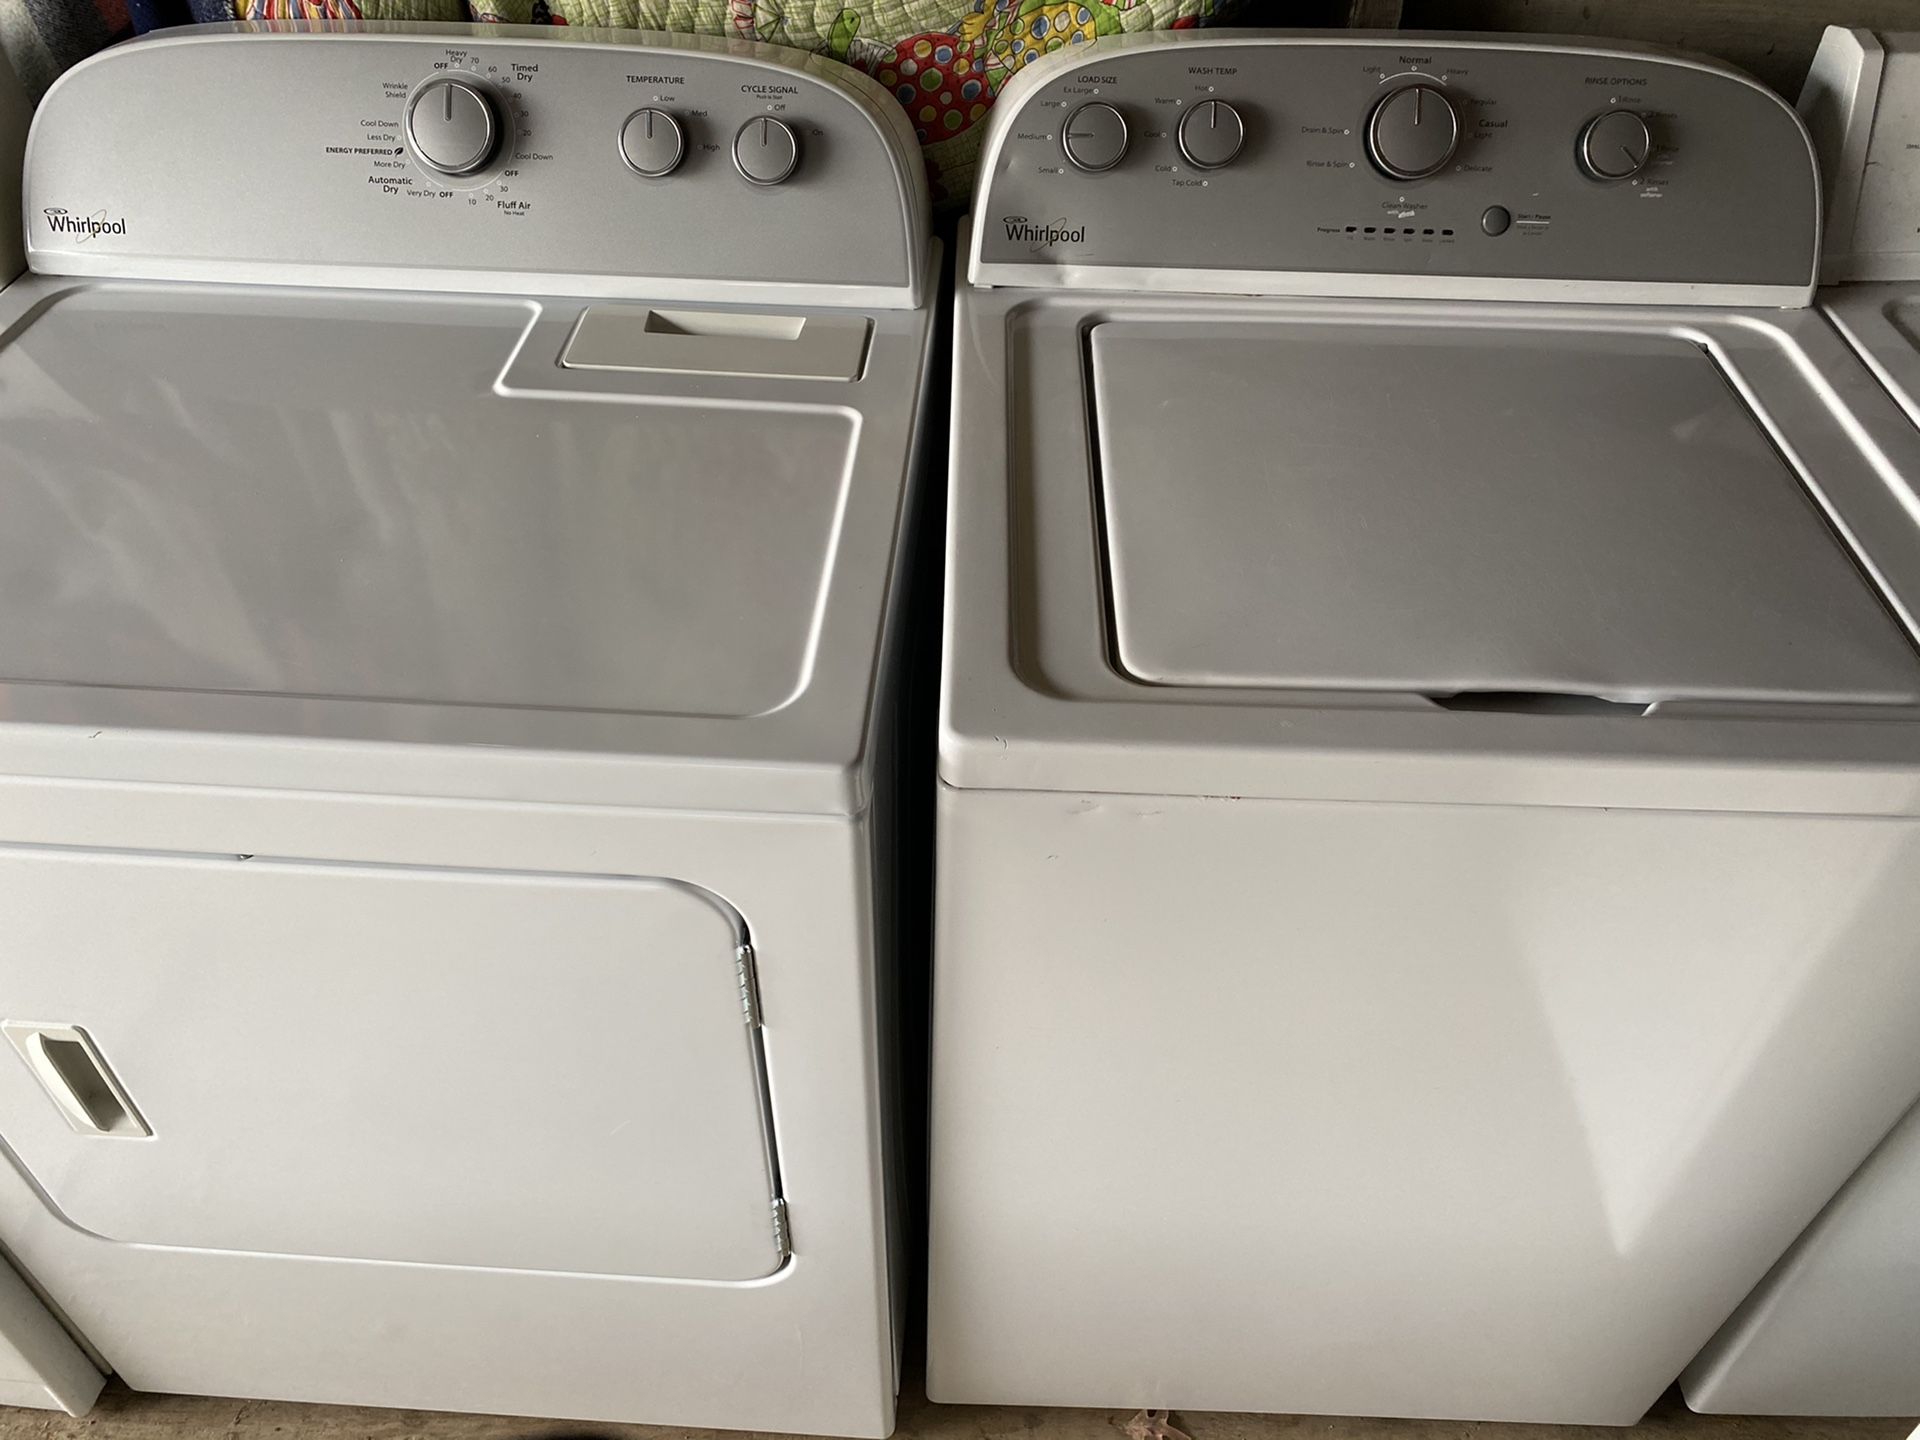 Washer and electric dryer sets